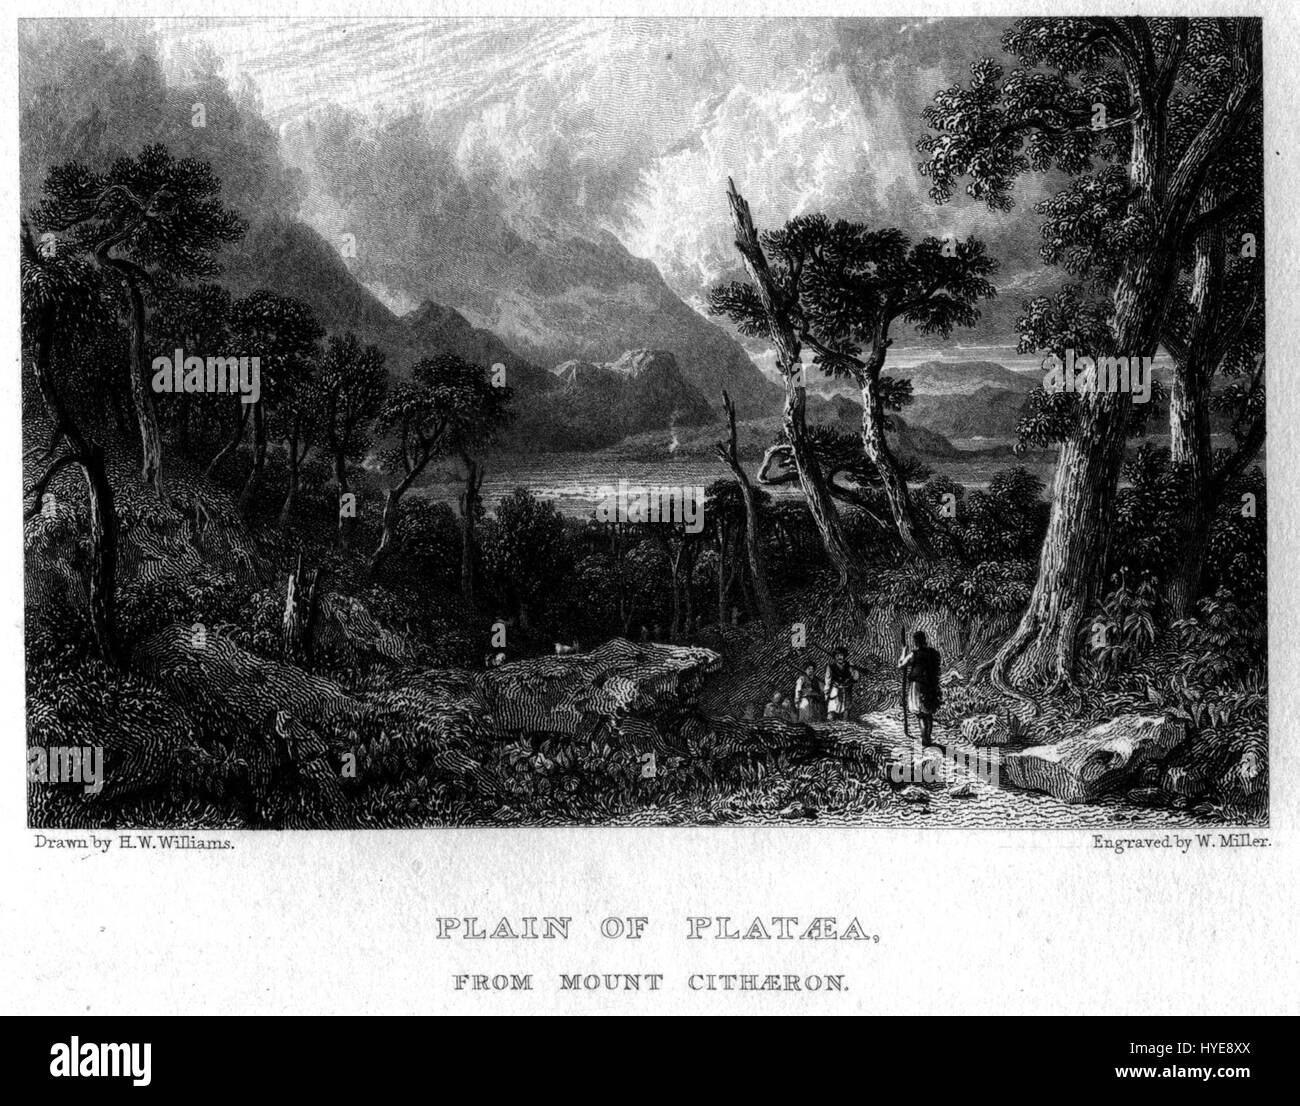 Plain of Plataea, from Mount Cithaeron engraving by William Miller after H W Williams Stock Photo